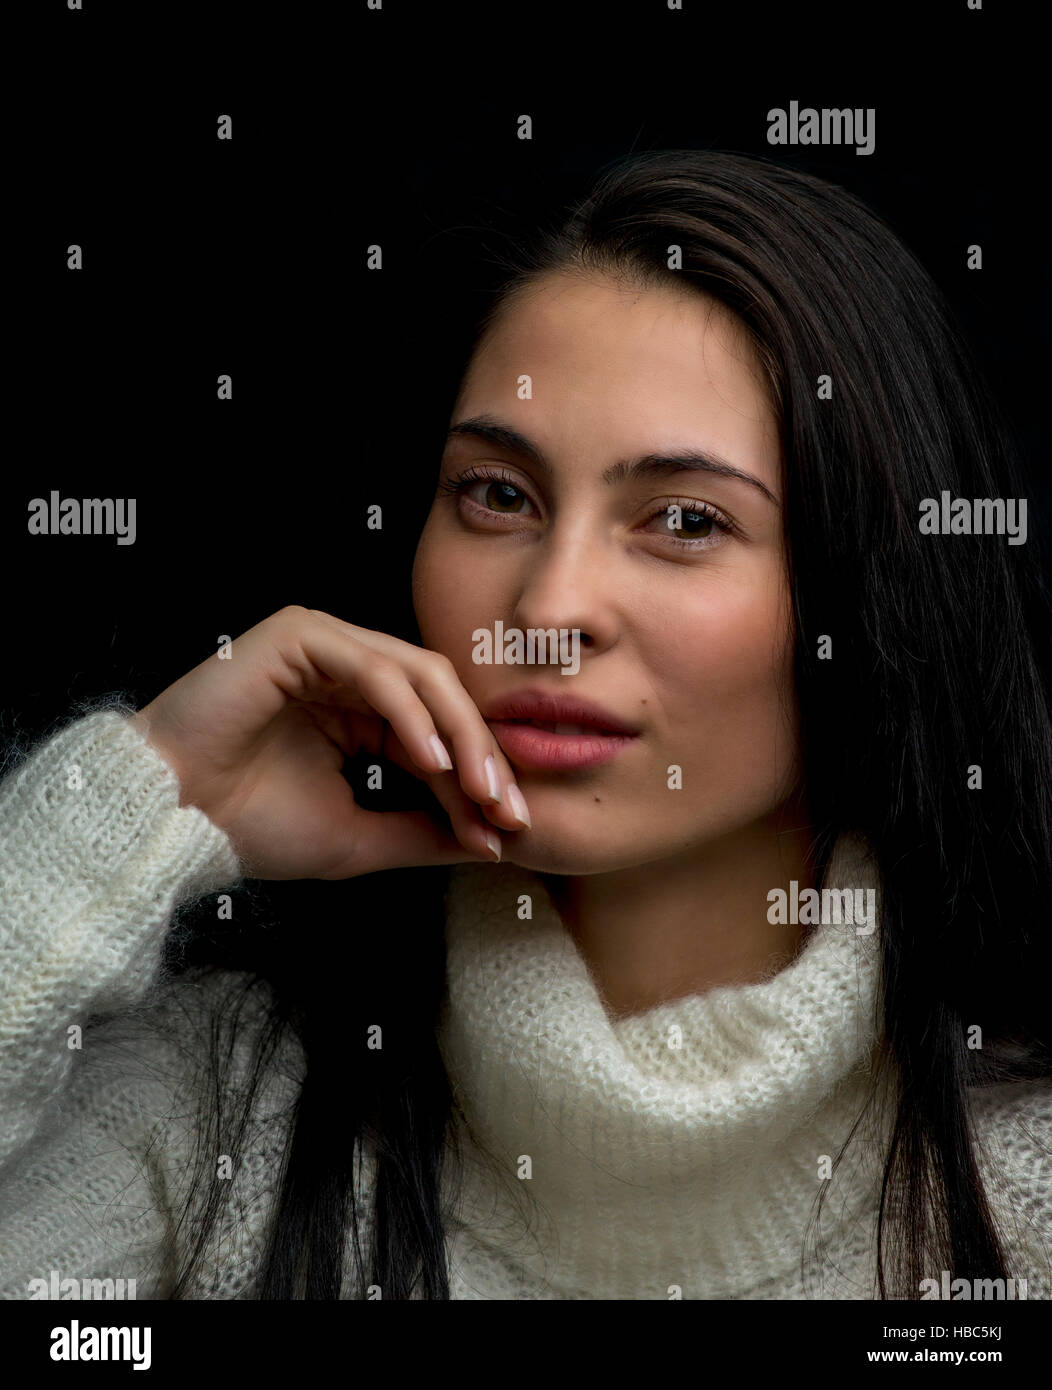 Portrait of young woman lokking at camera on black background Stock Photo